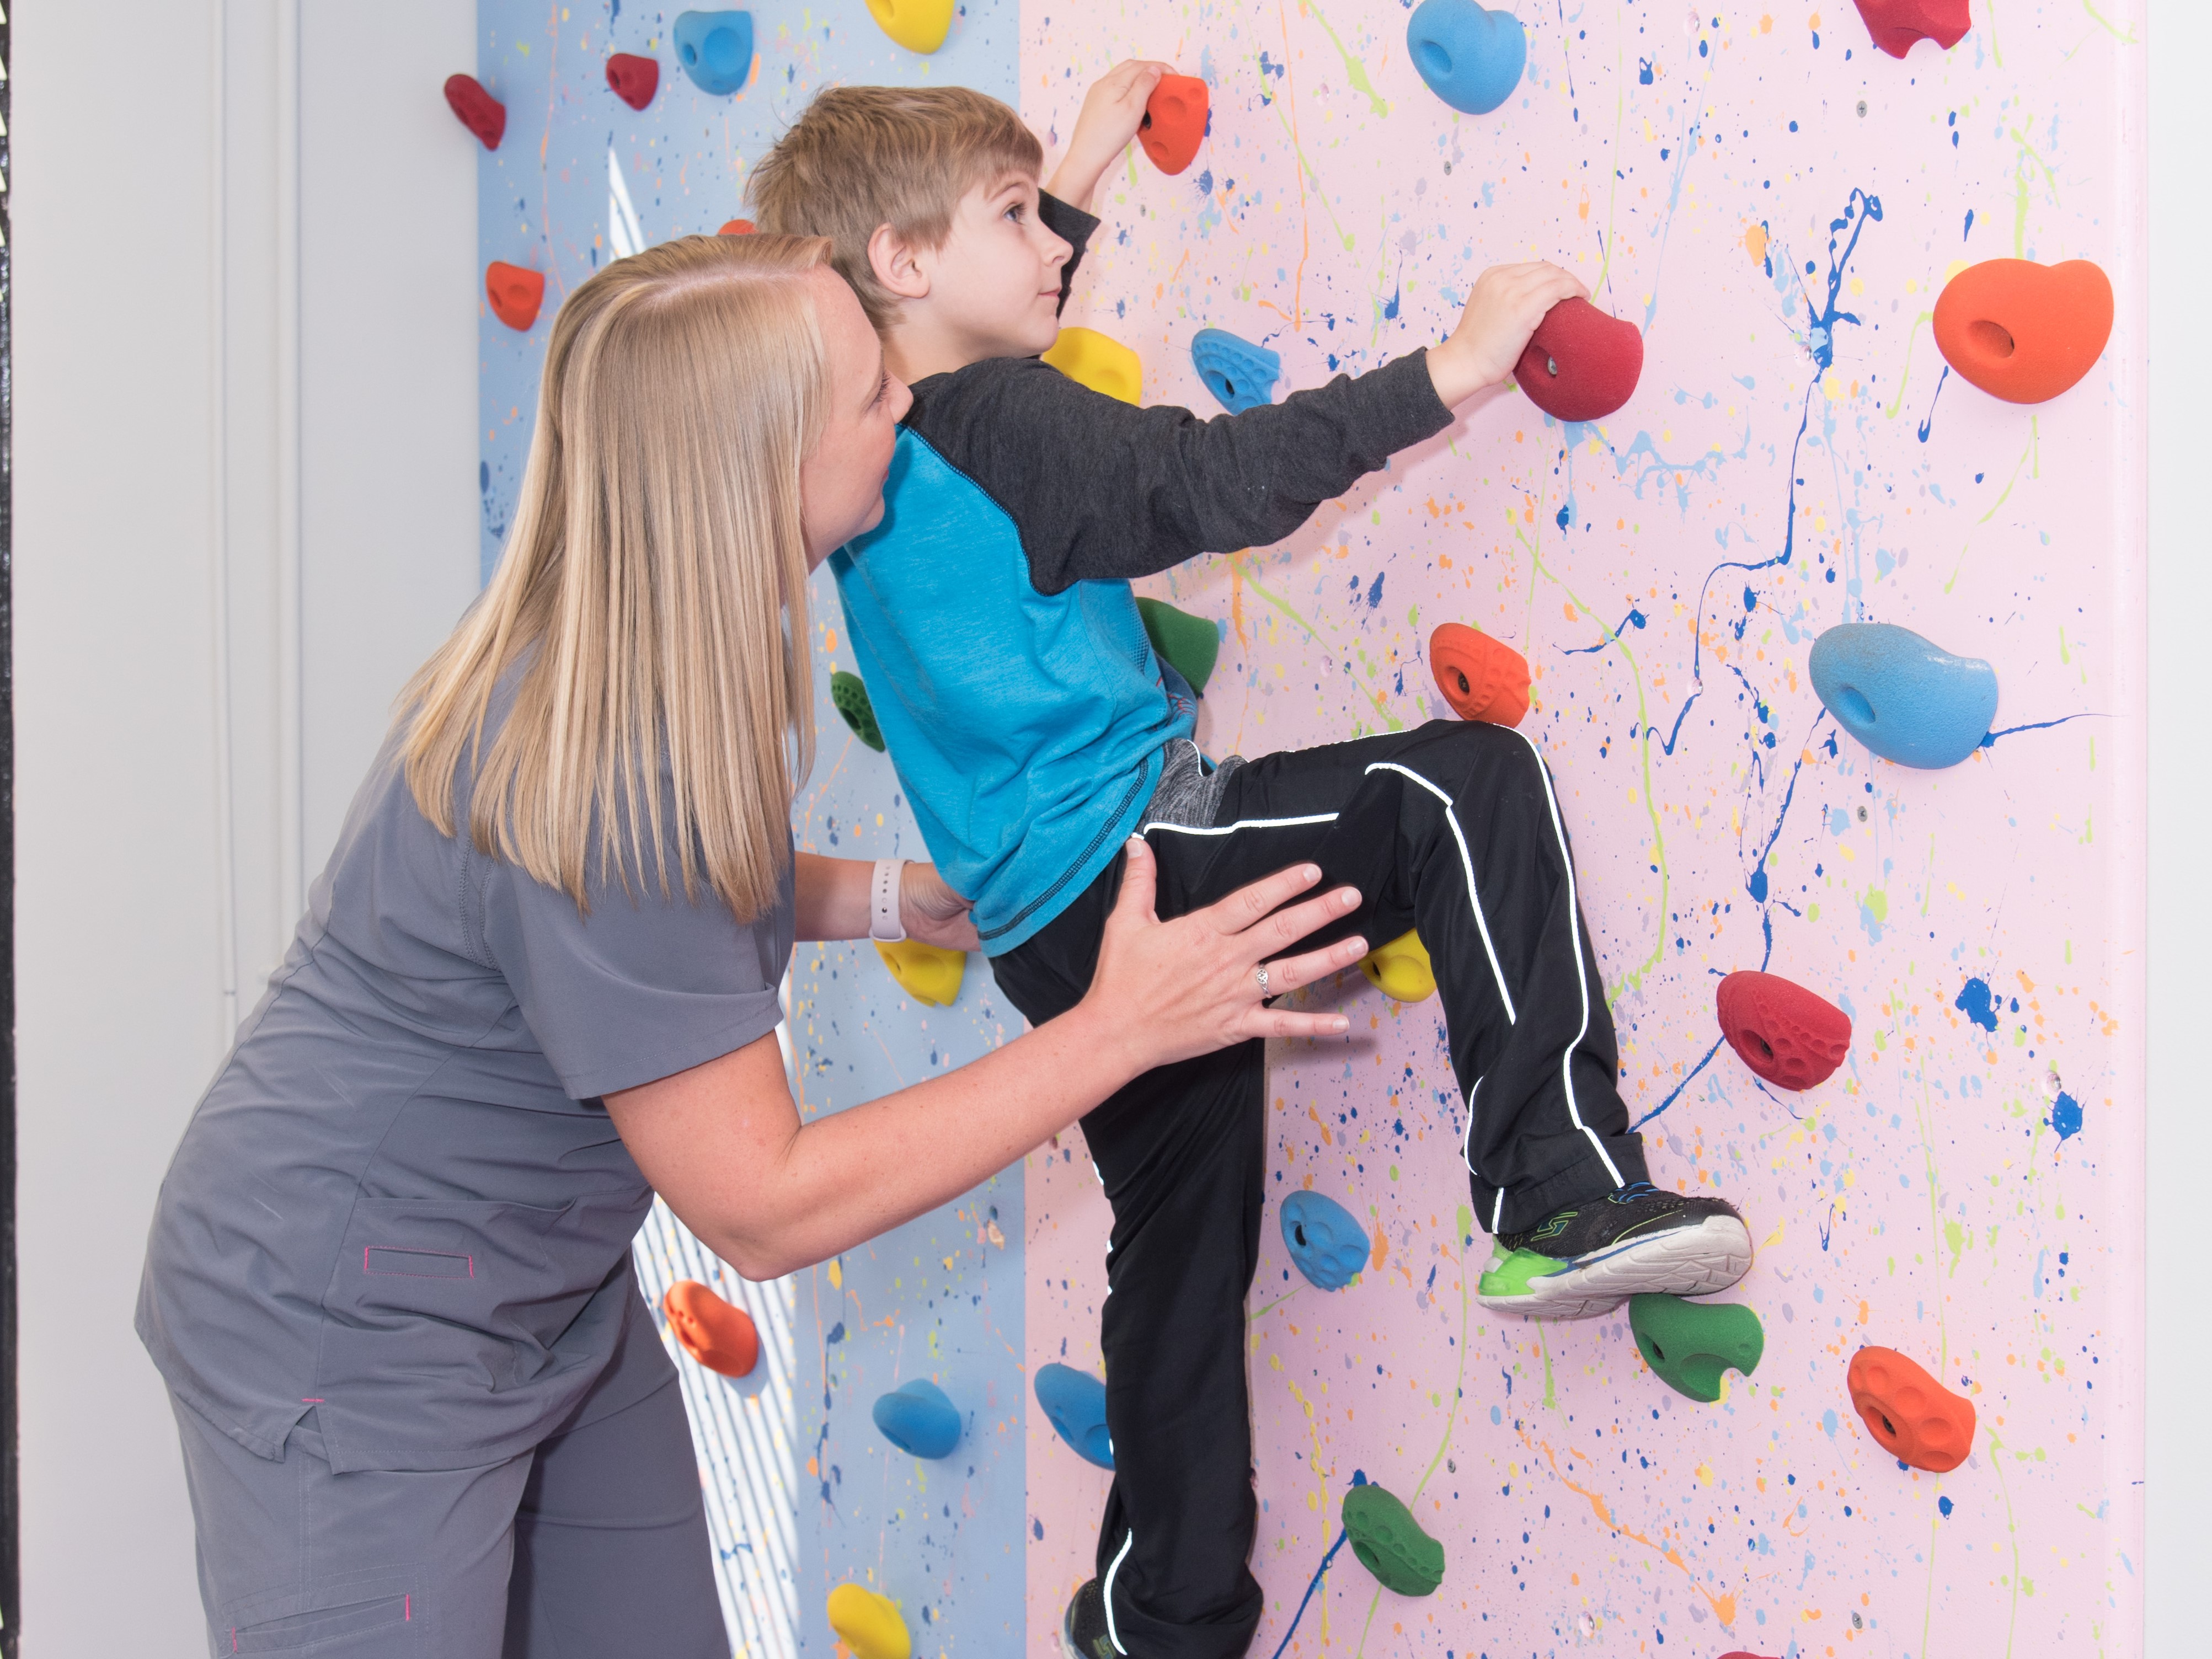 Tri-County Therapy Physical Therapy and Rock Wall Charleston, SC